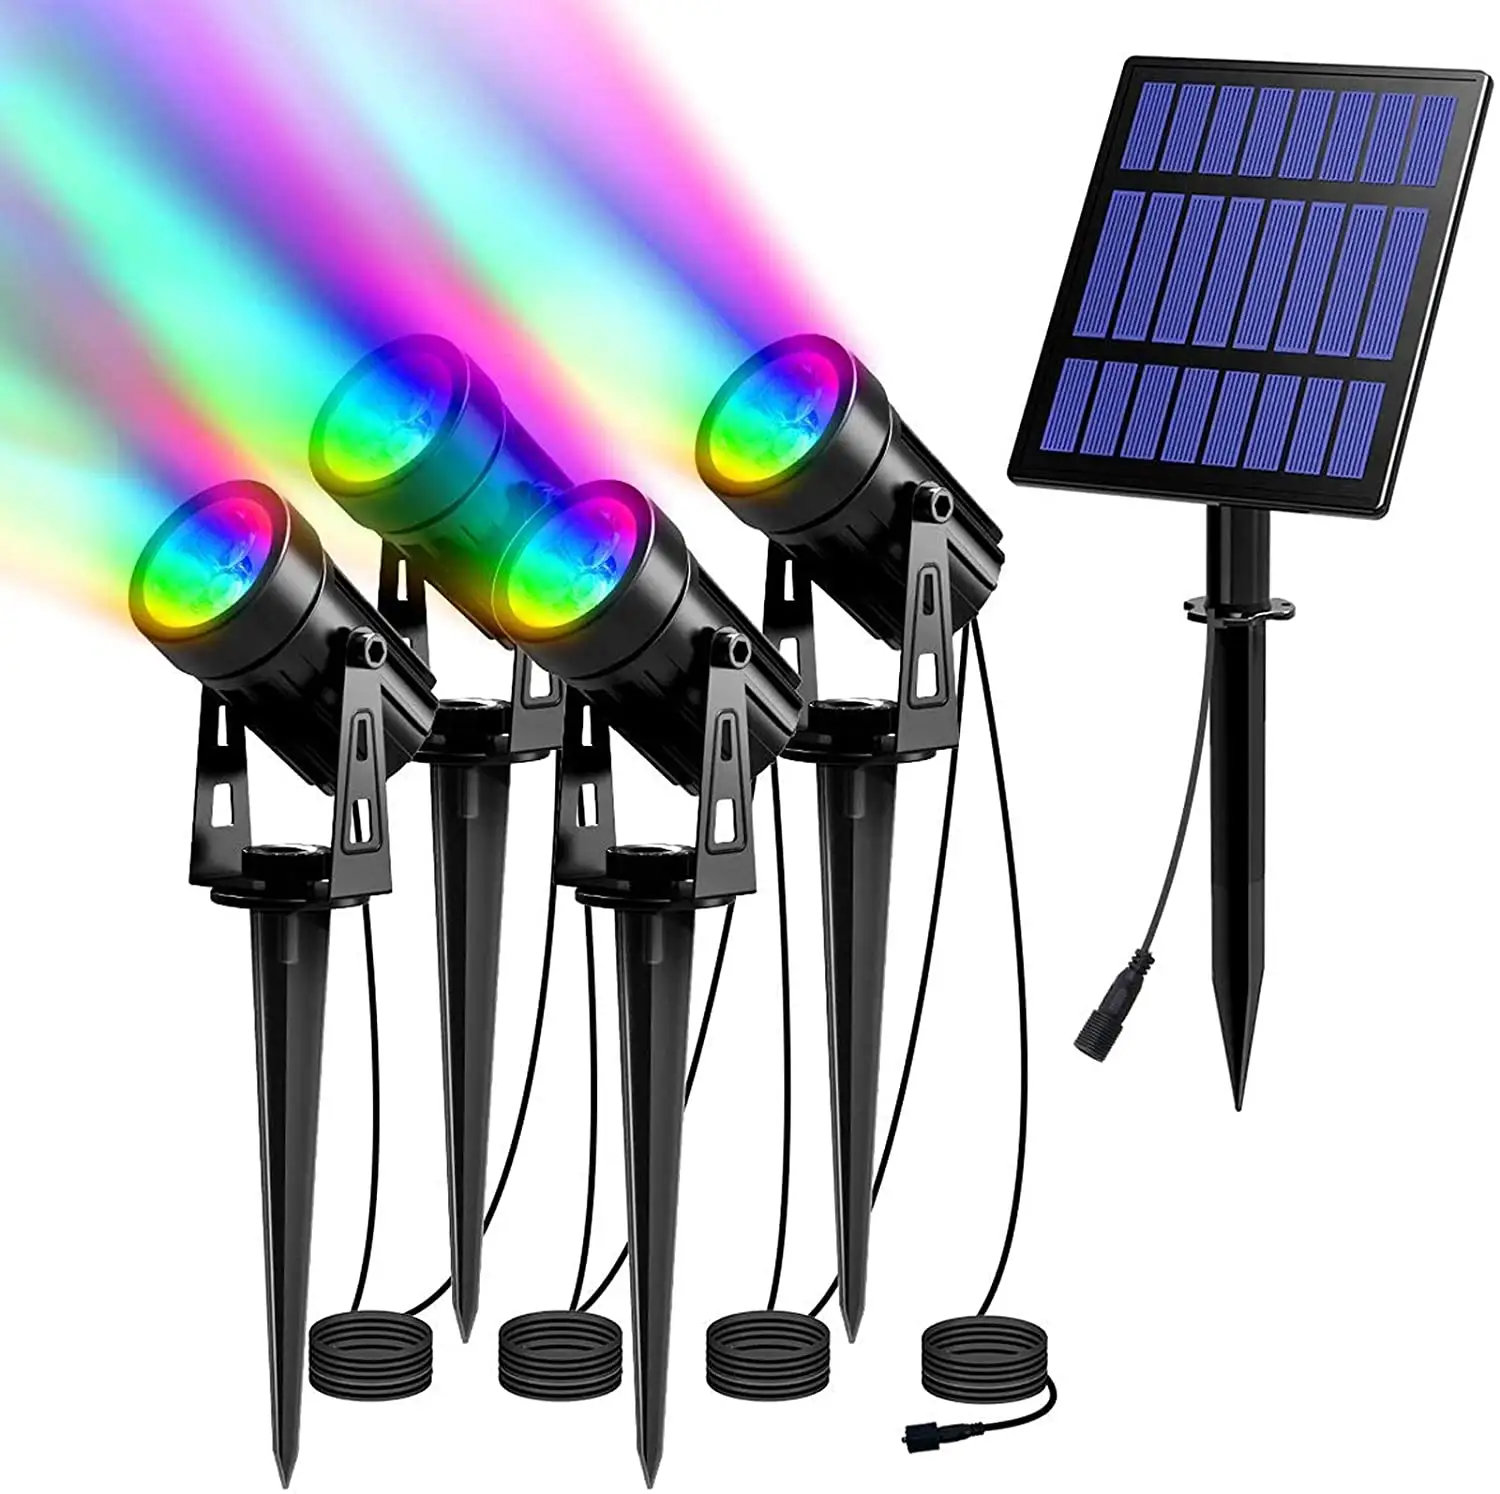 4 Pack Solar Spotlights RGB Landscape Lights Color Changing Low Voltage Outdoor Solar Spotlight IP65 Waterproof 9.8ft Cable Auto